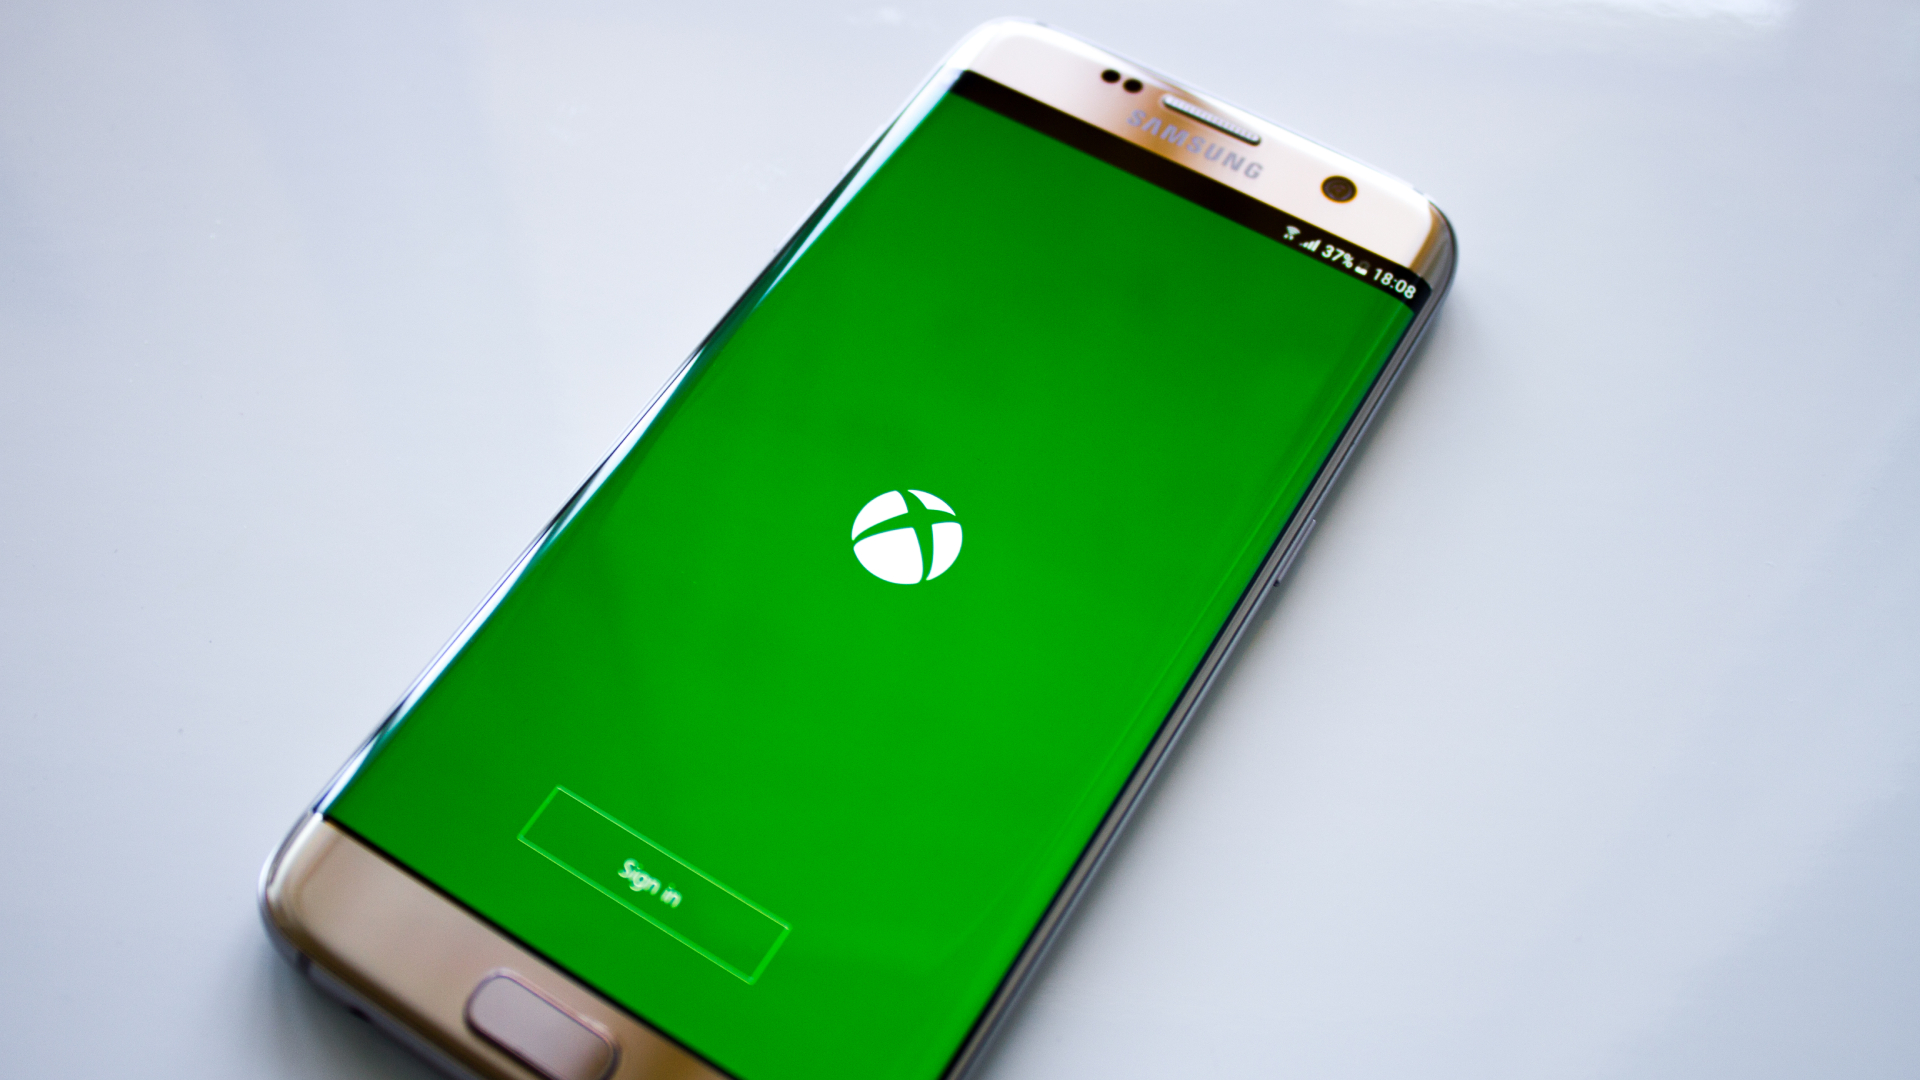 Xbox Cloud Gaming played on a Samsung smartphone